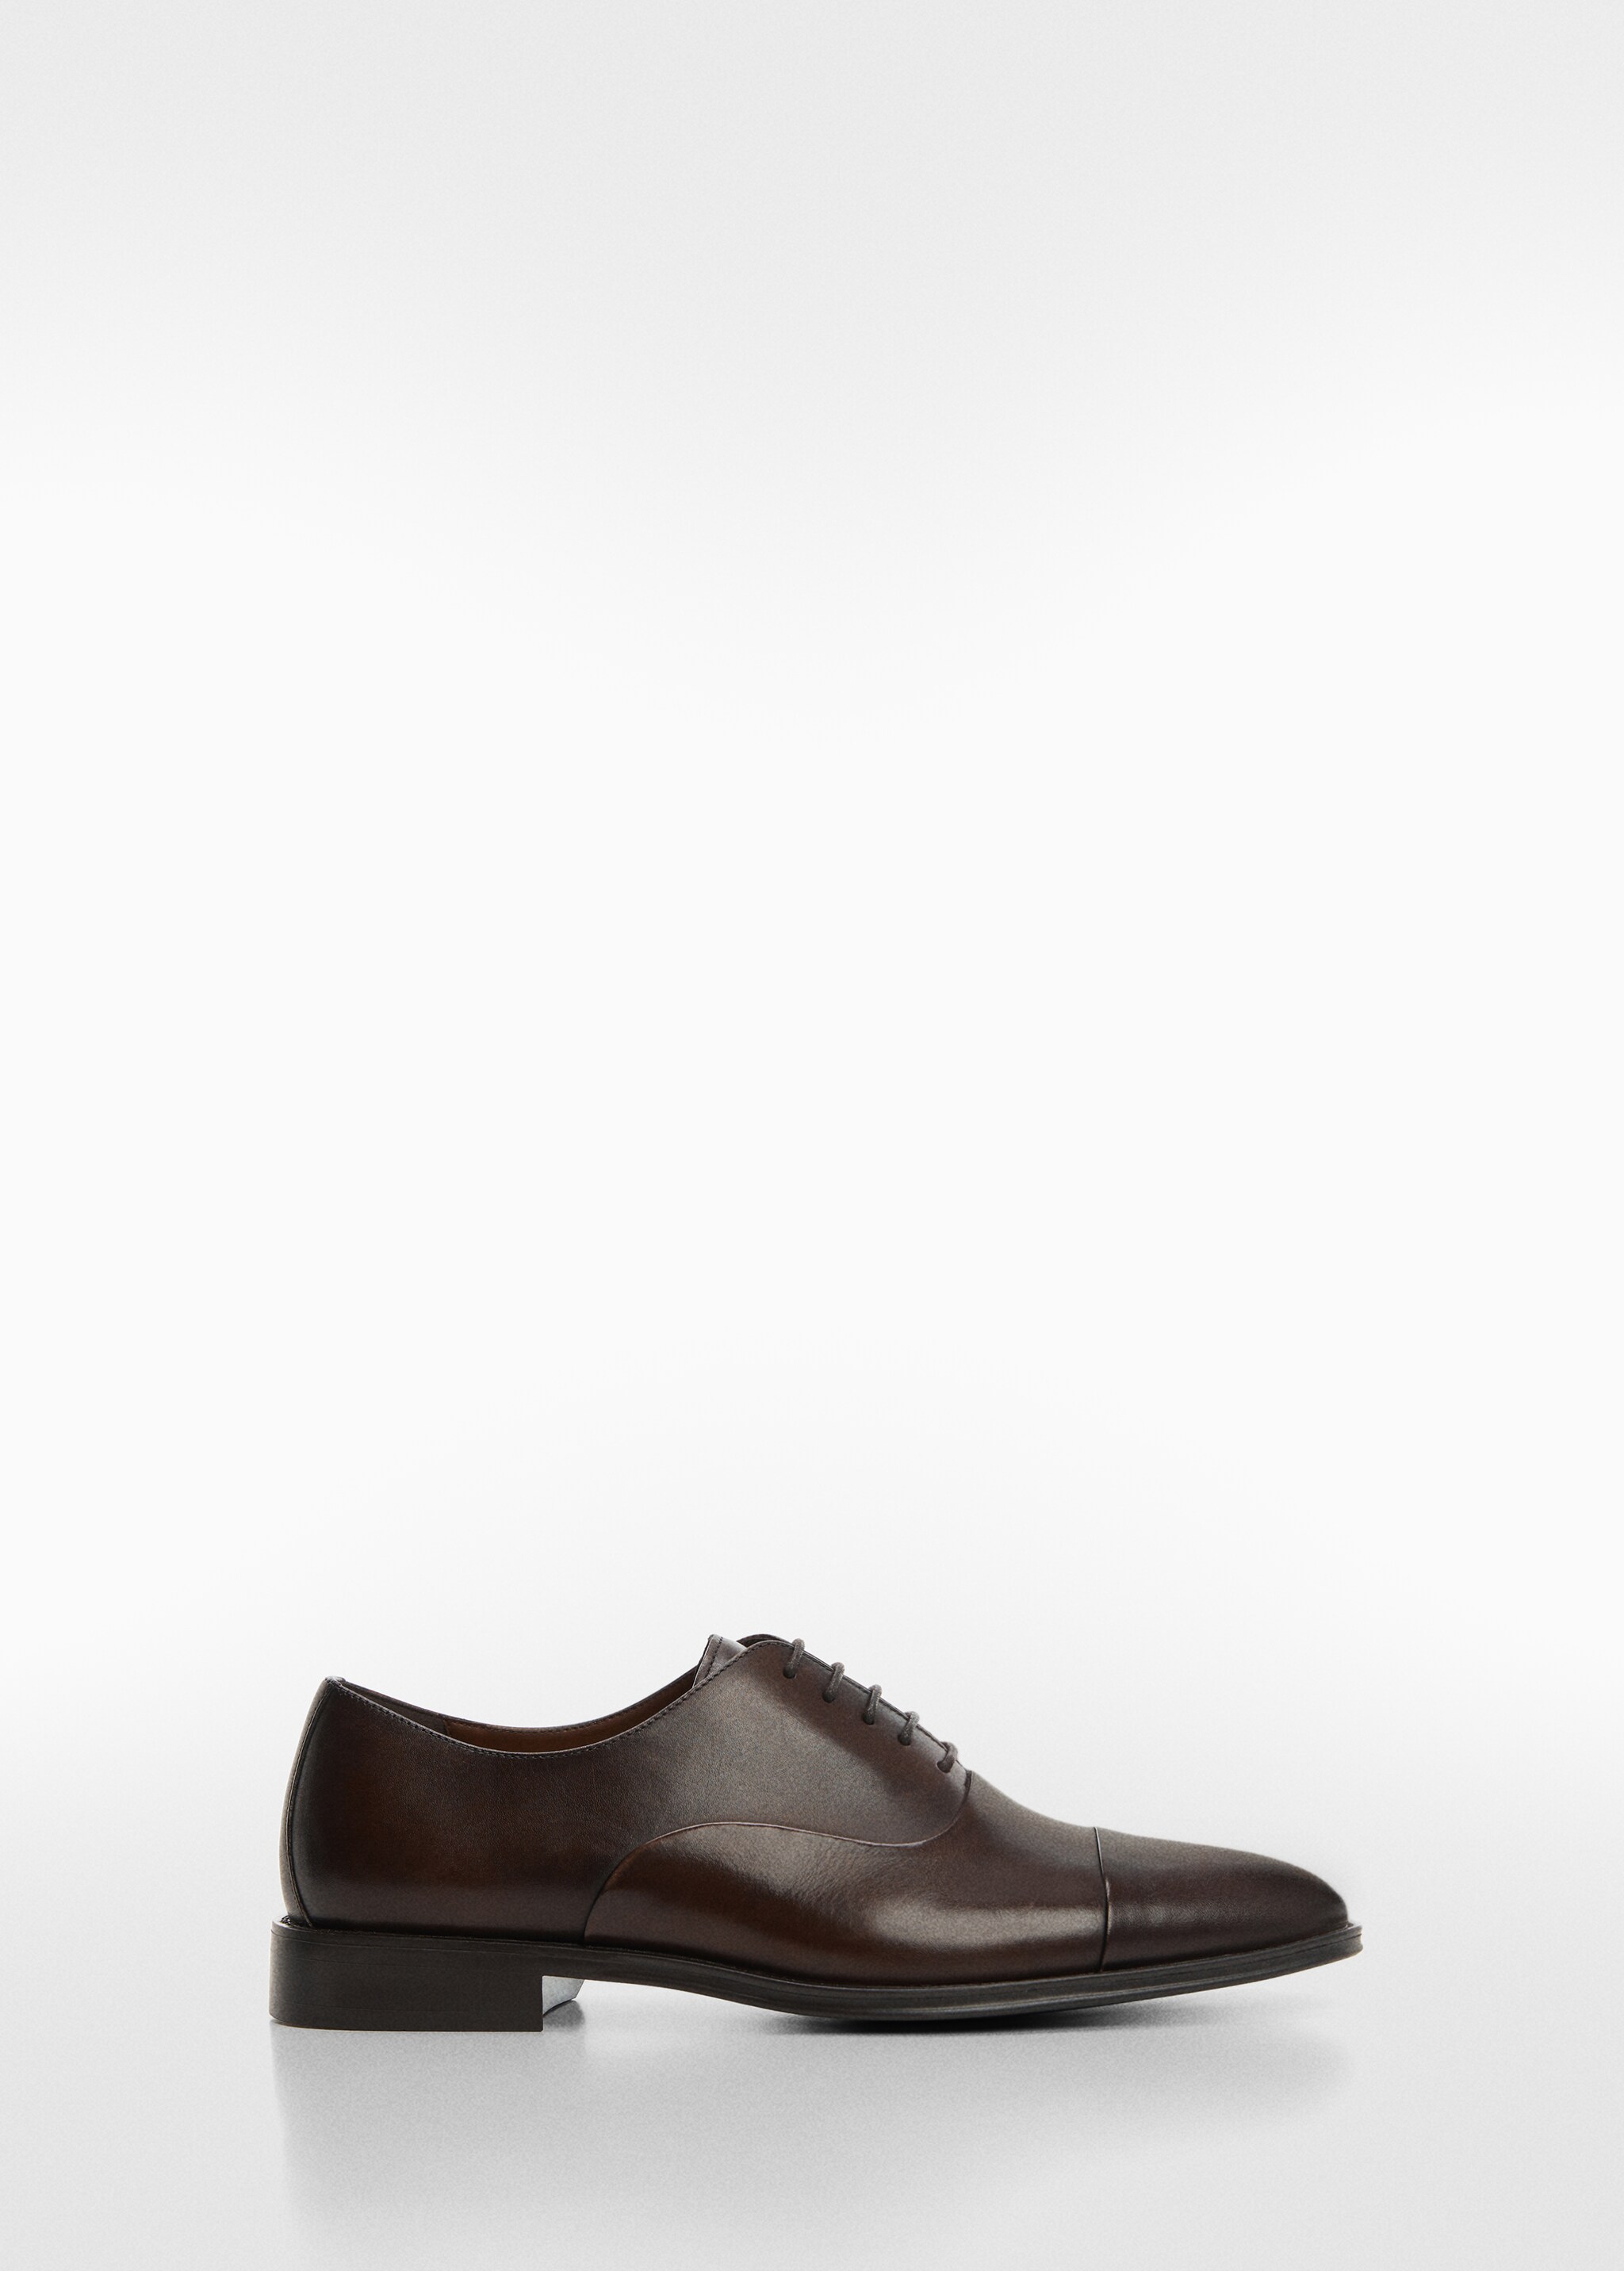 Elongated leather suit shoes - Article without model